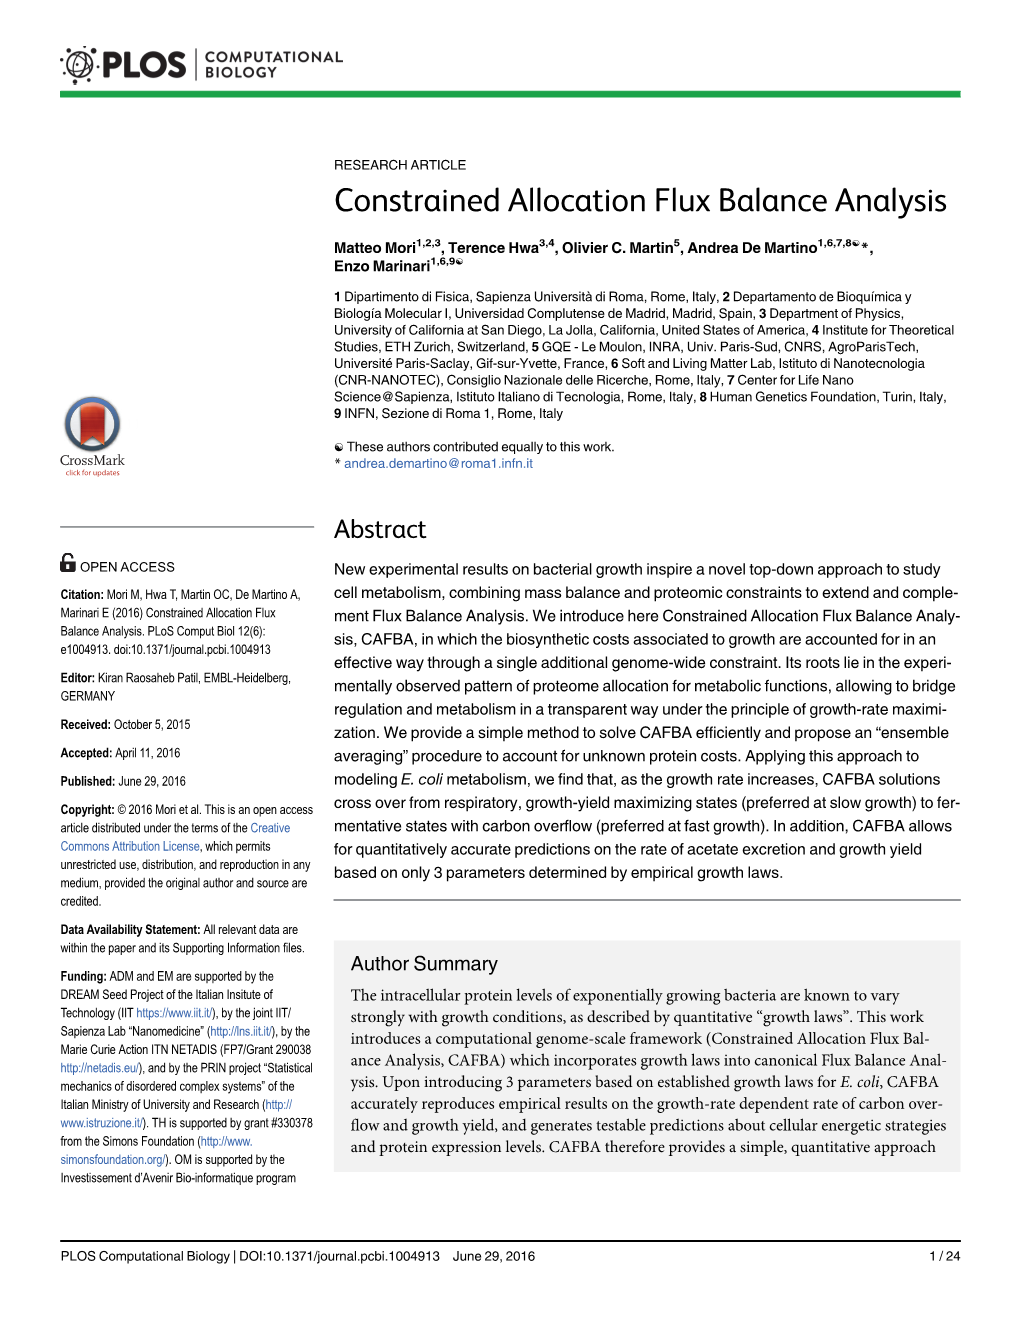 Constrained Allocation Flux Balance Analysis